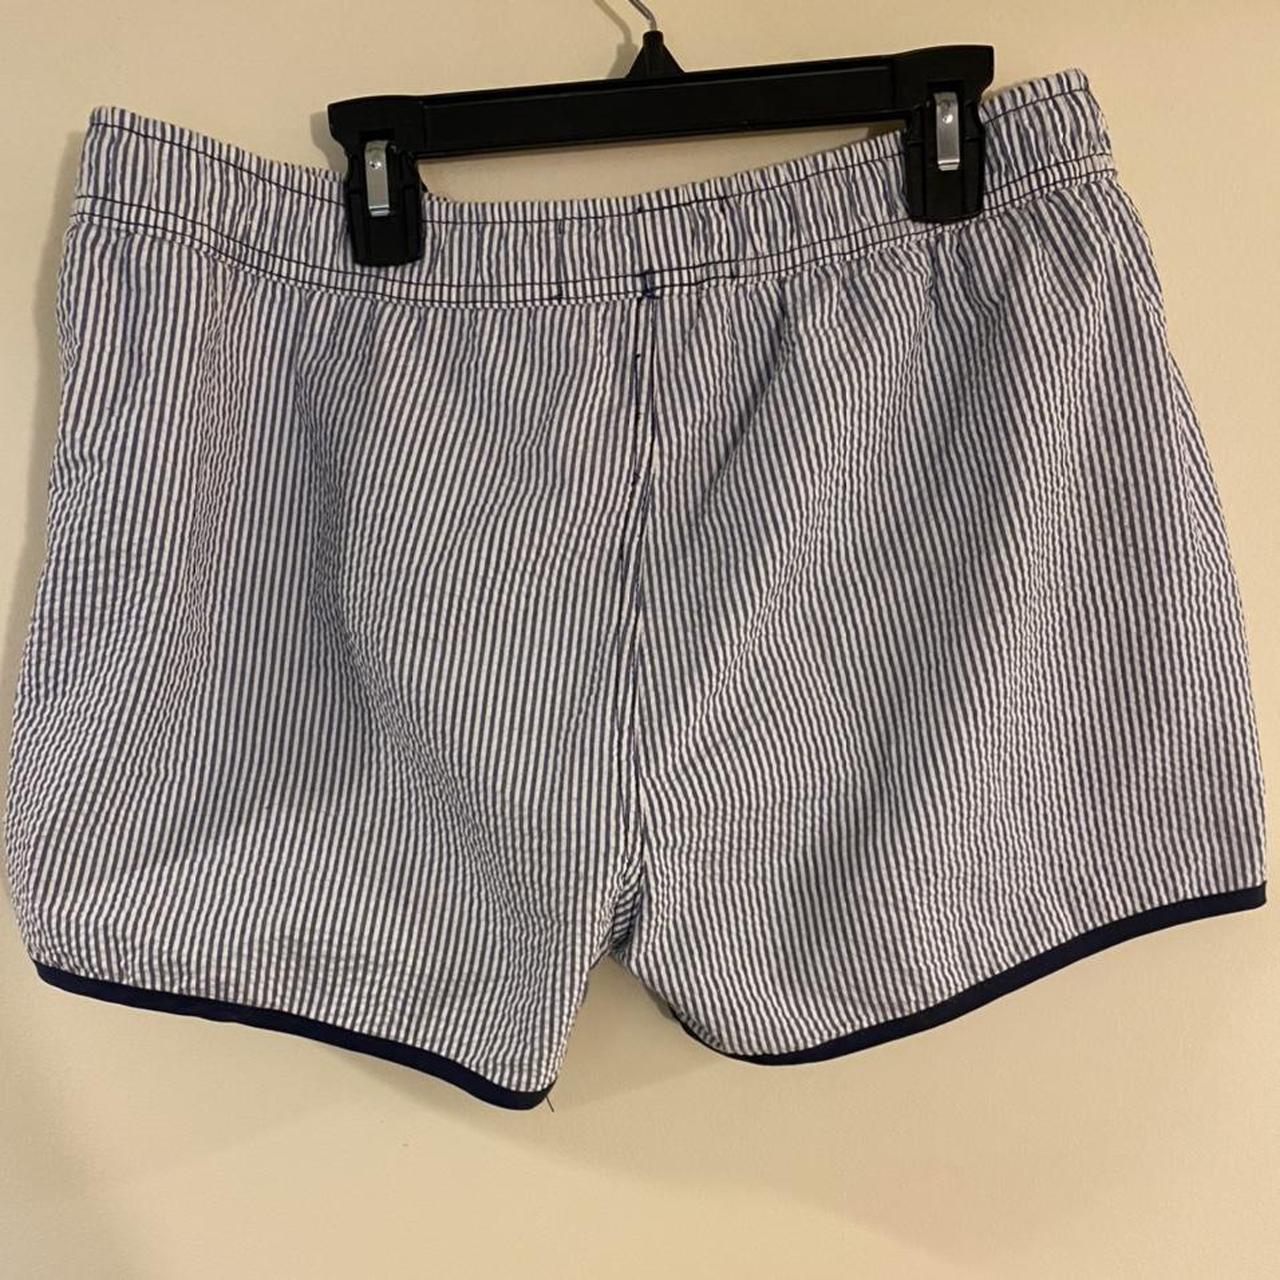 Native Youth Men's Blue and White Shorts (2)